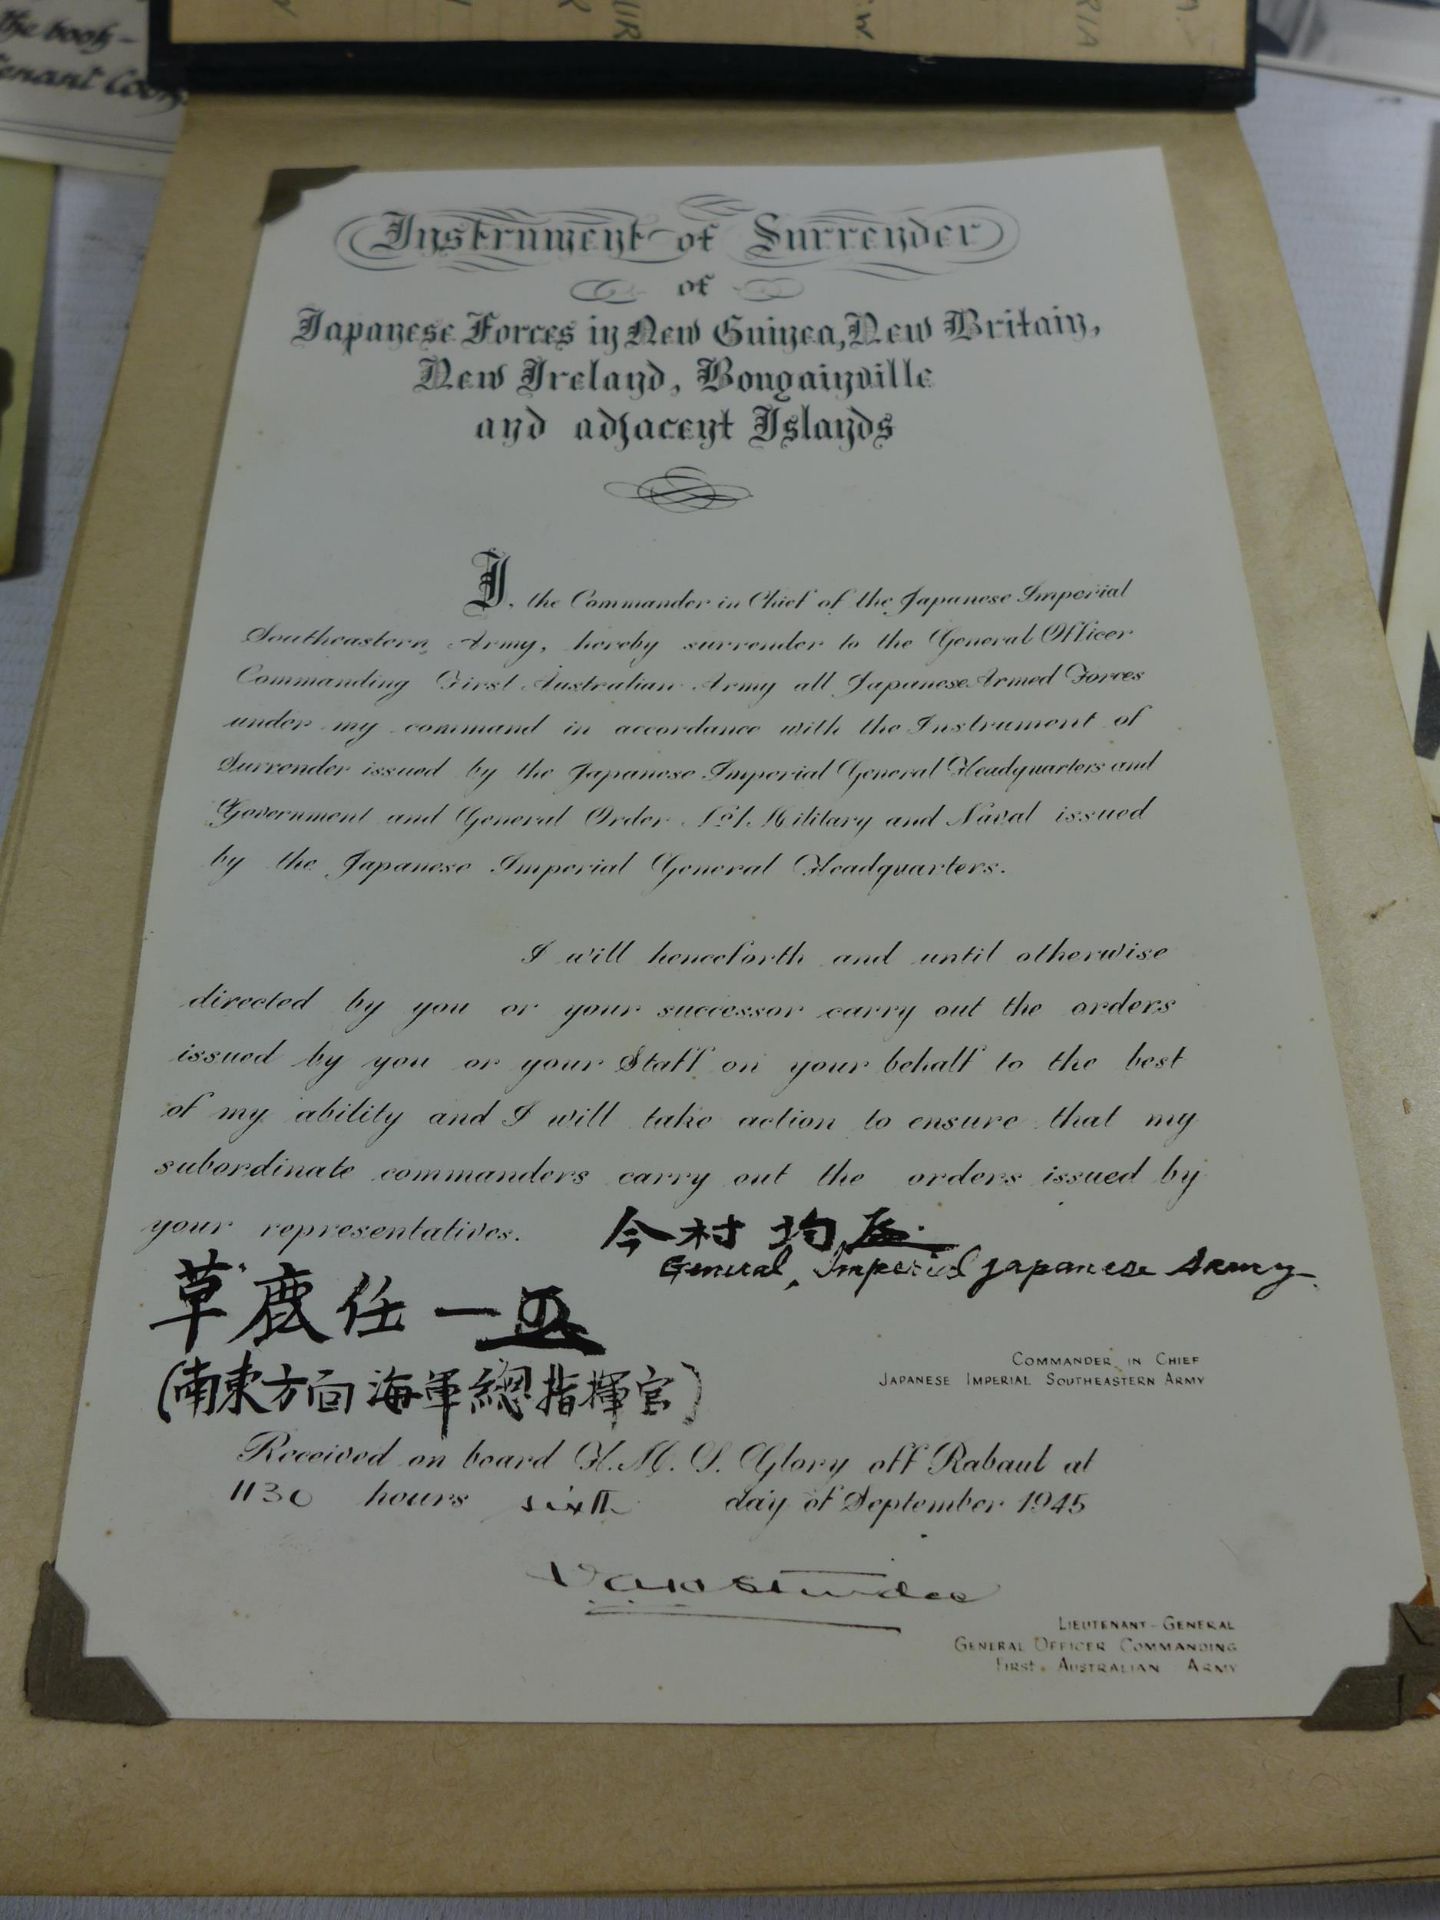 A WORLD WAR II PHOTOGRAPH ALBUM CONTAINING PHOTOGRAPHS OF THE JAPANESE SIGNING OF THE INSTRUMENT - Bild 8 aus 9